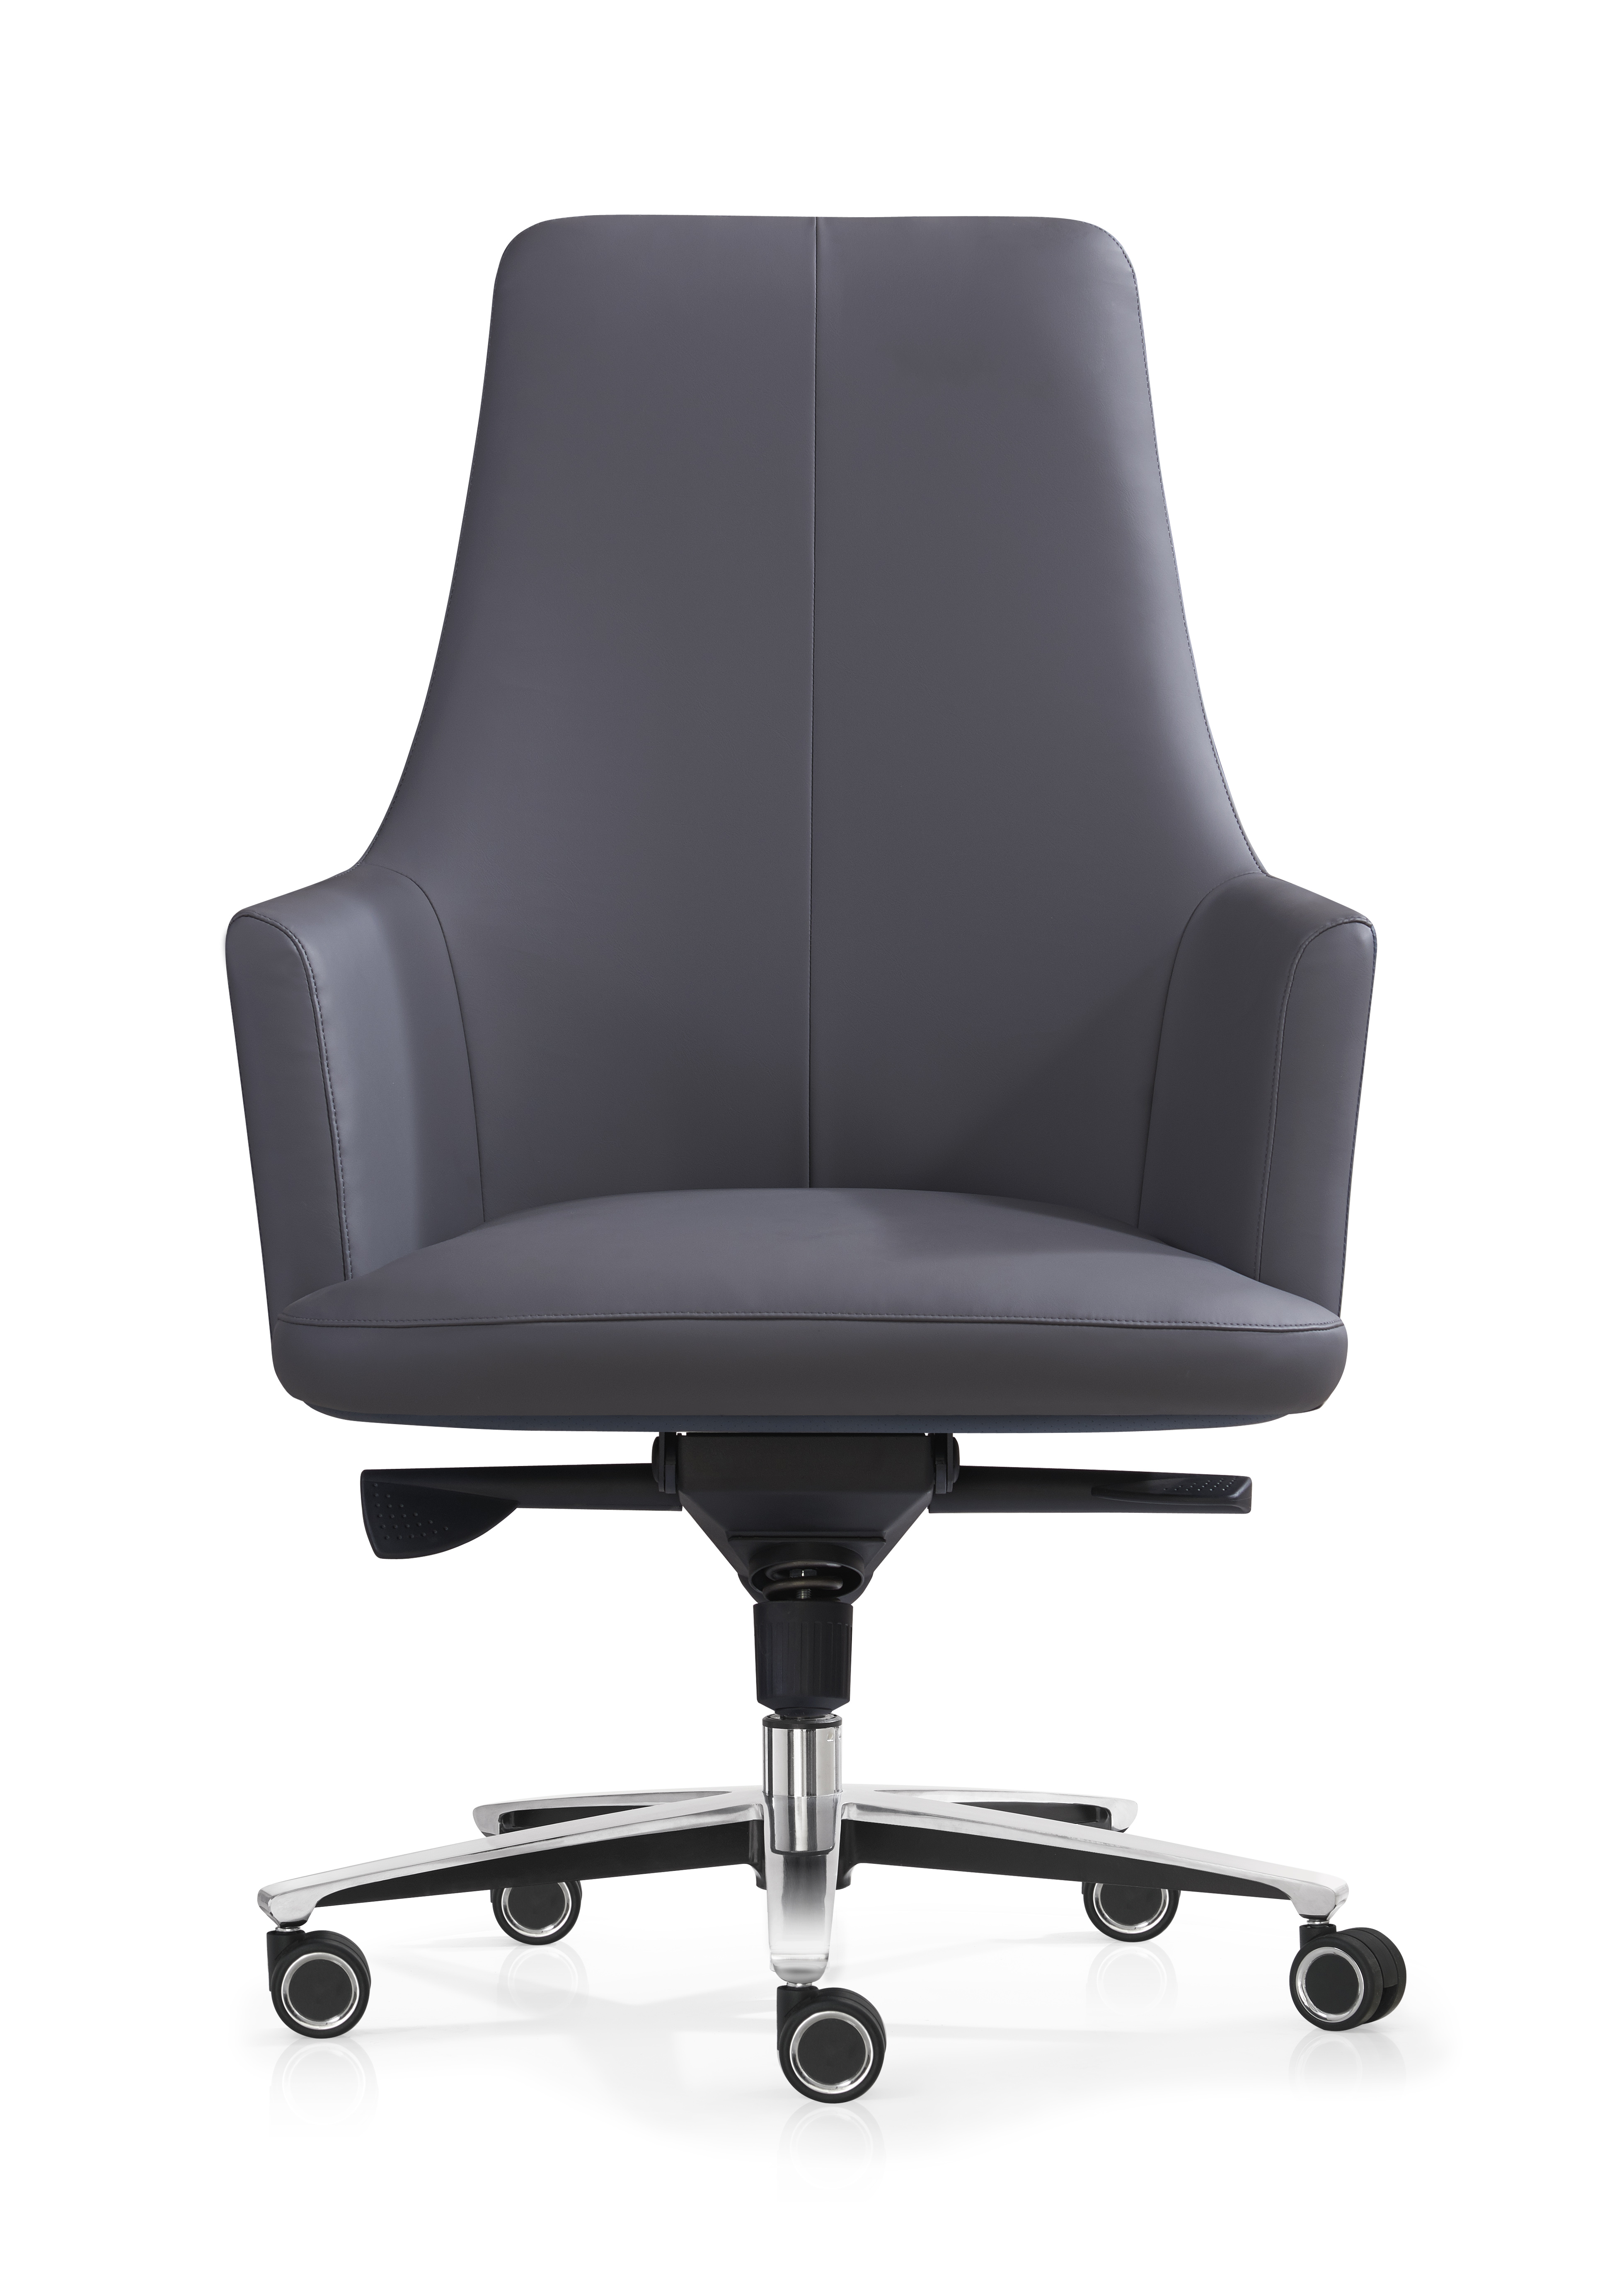 pu leather desk chair, pu leather high back office chair, white pu leather office chair, black leather office chair modern